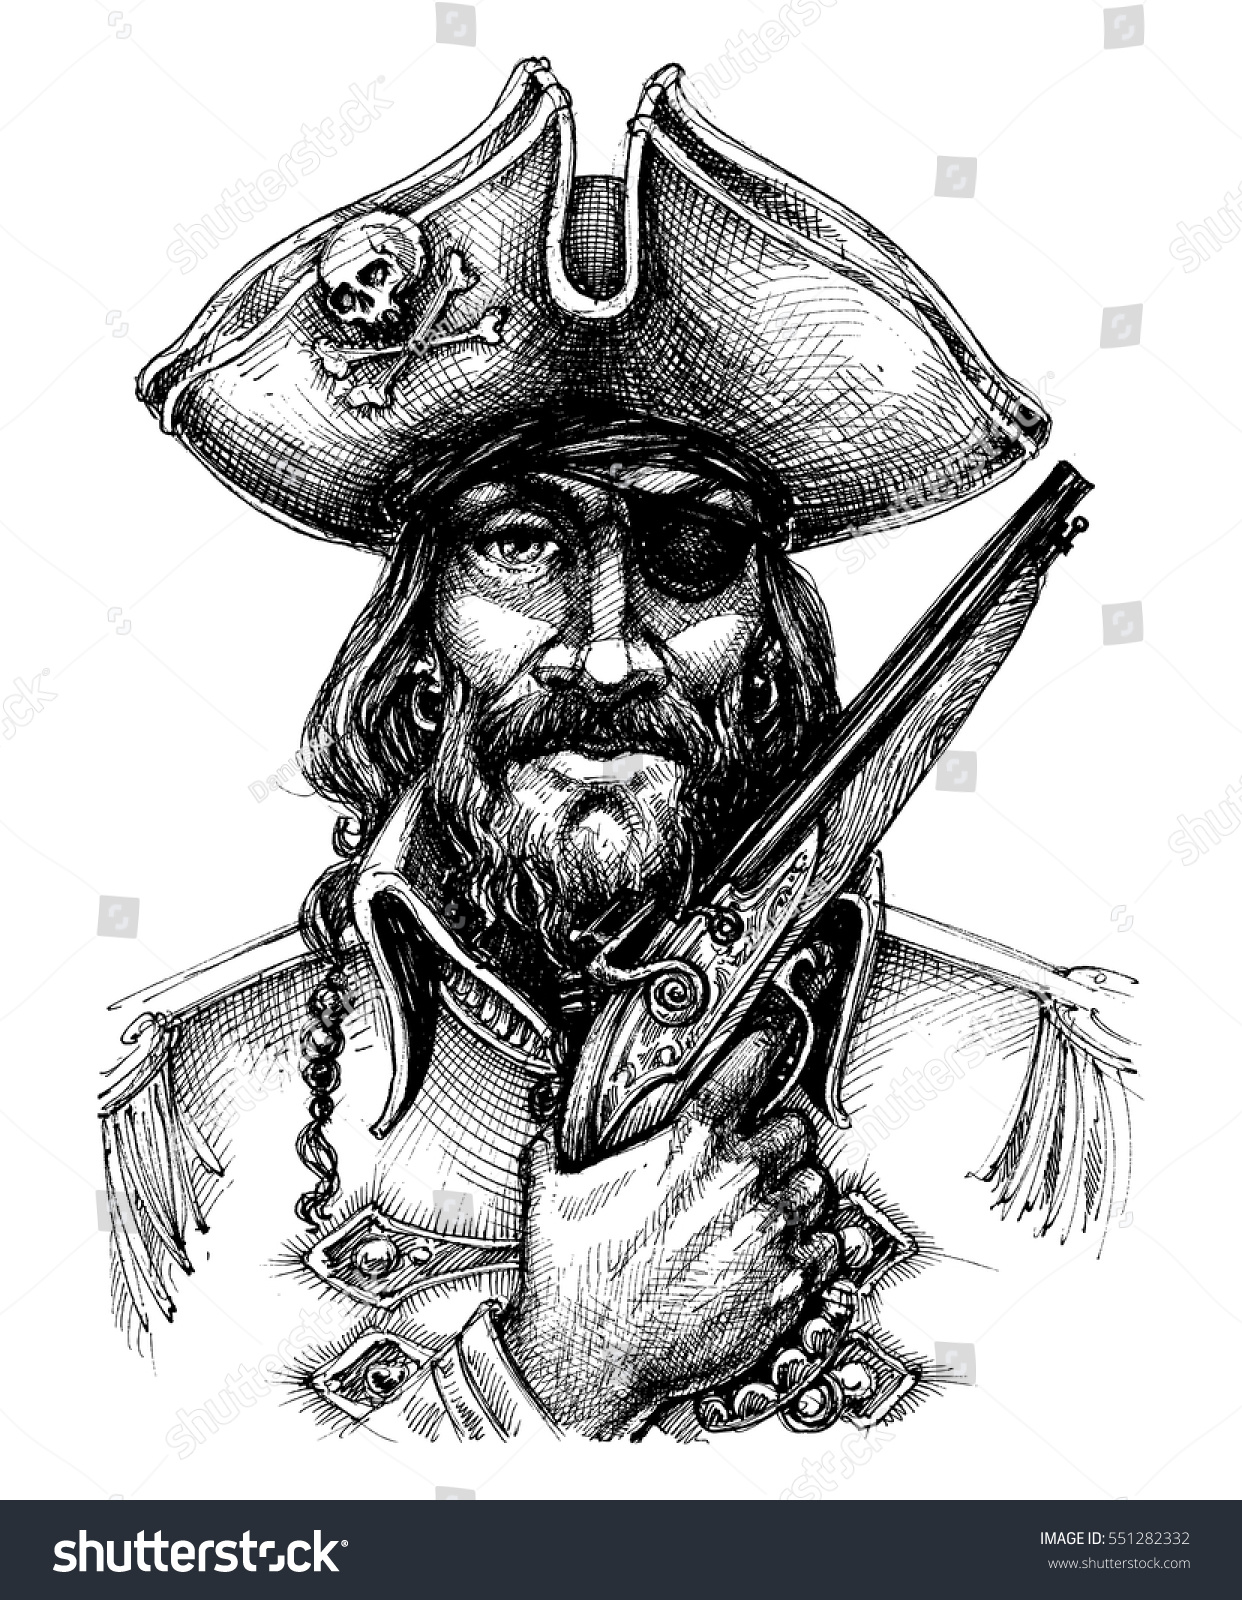 Pirate Portrait Drawing Stock Vector Royalty Free 551282332 Shutterstock 5605